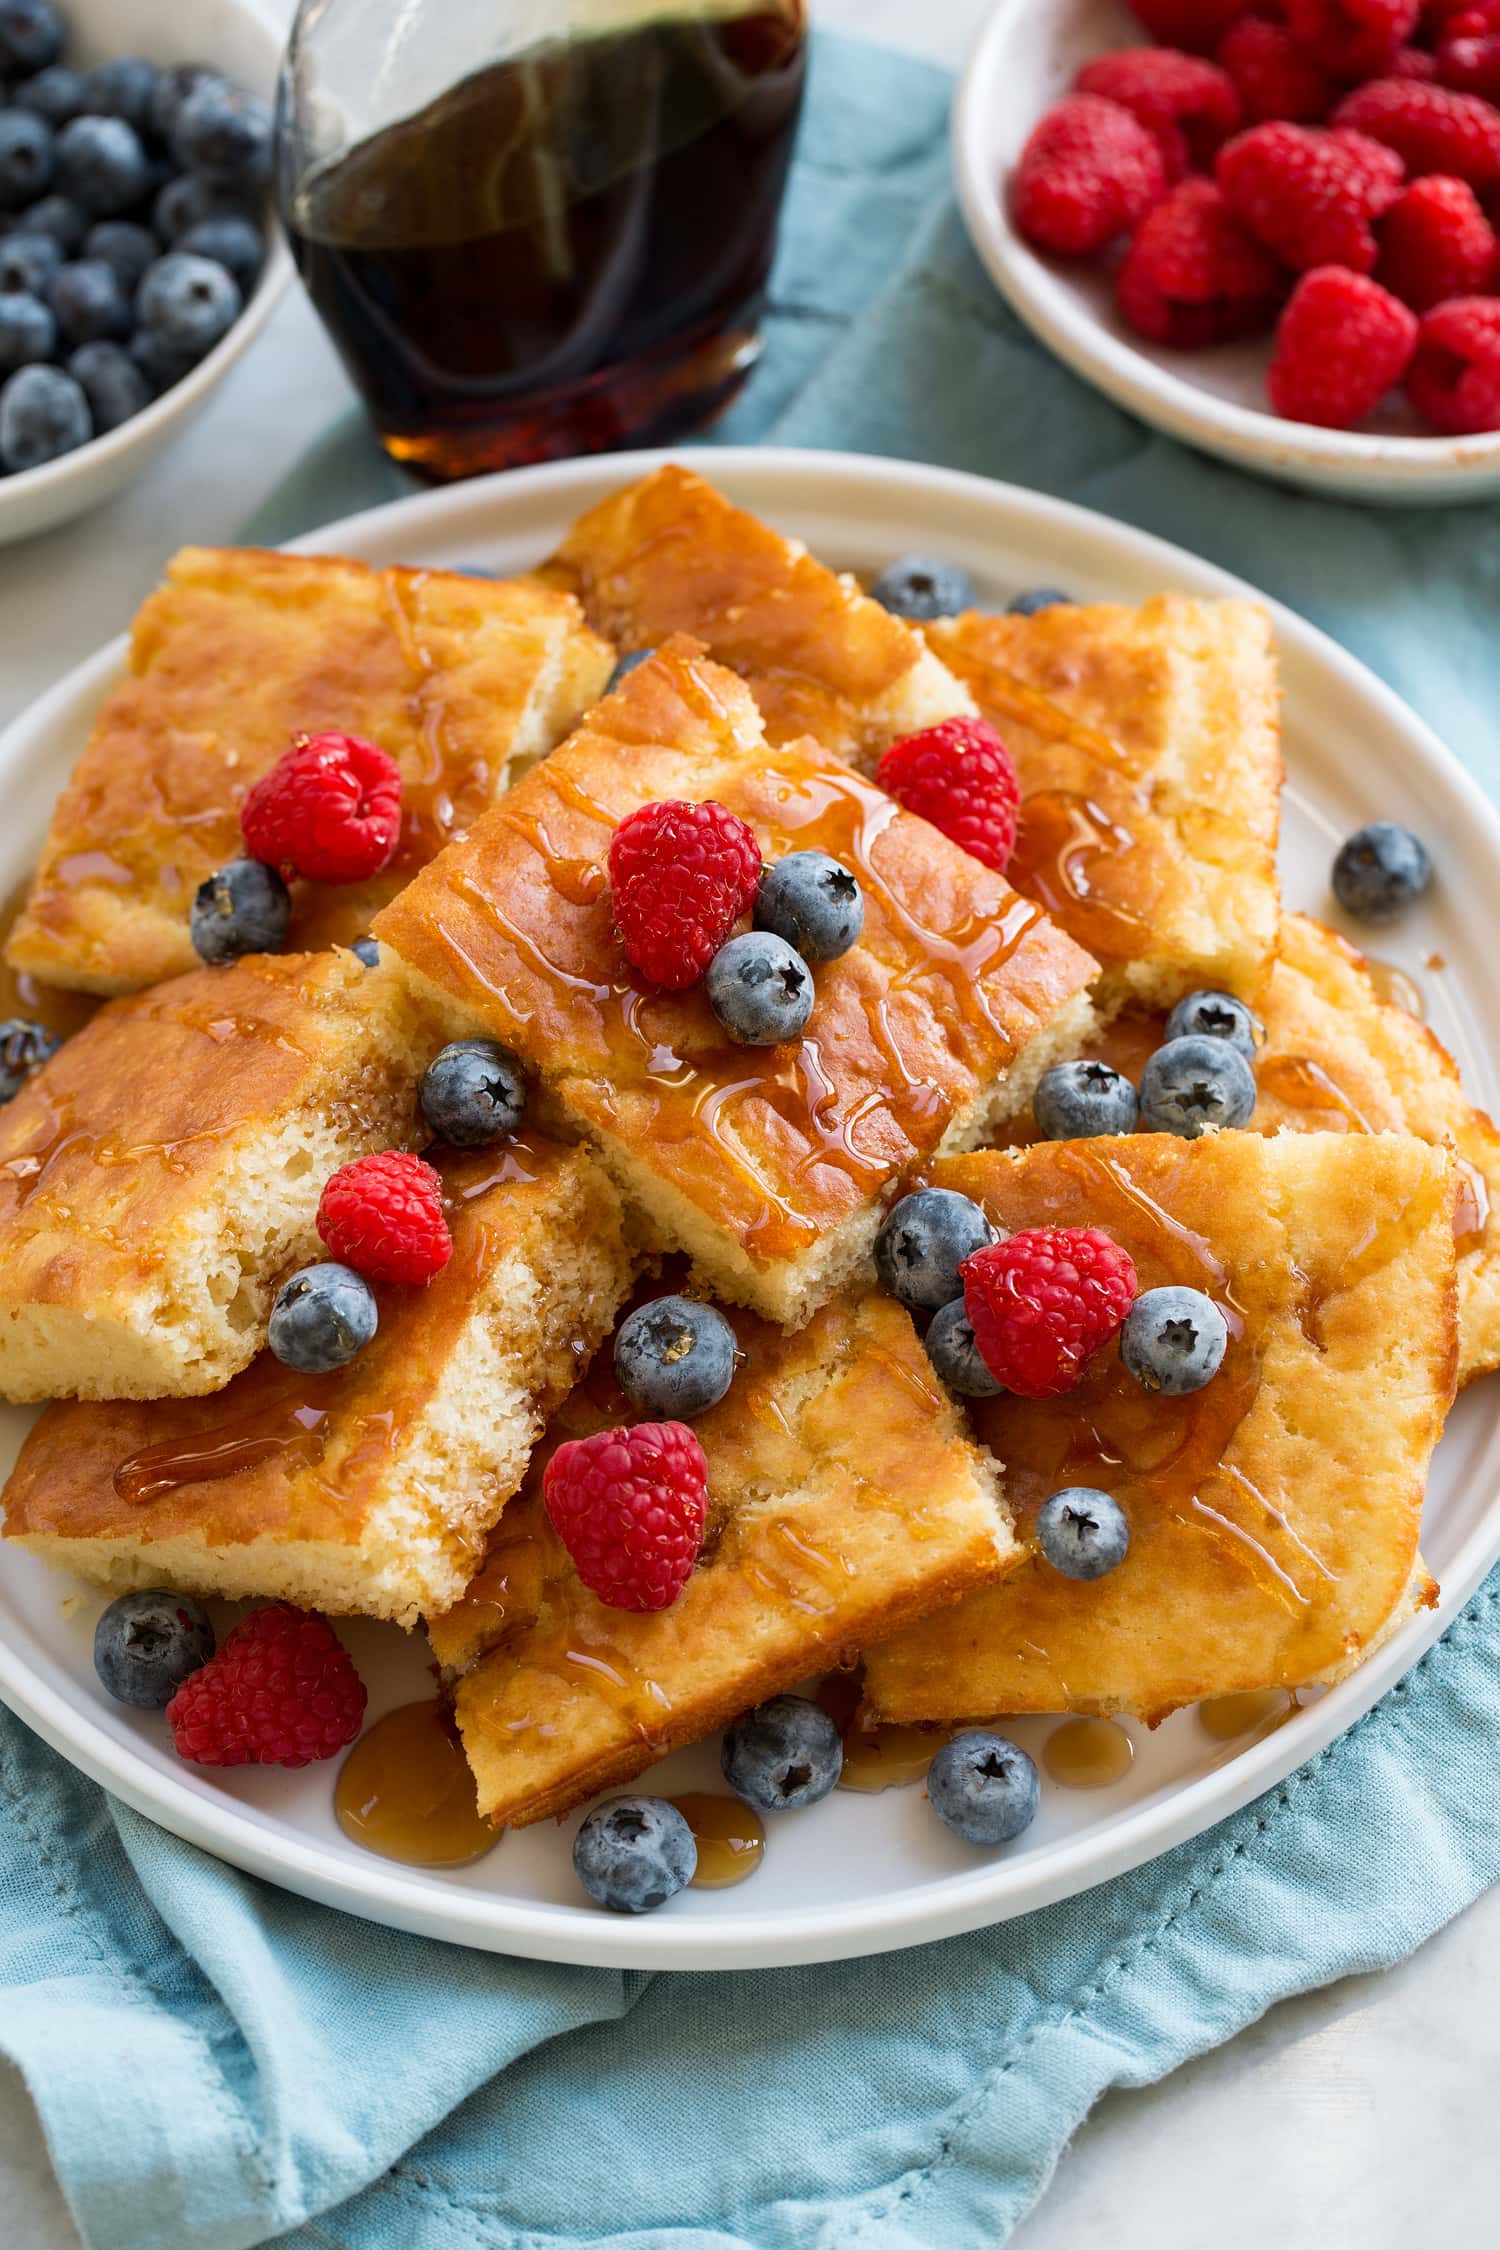 Slices of sheet pan pancakes piled with fruit.